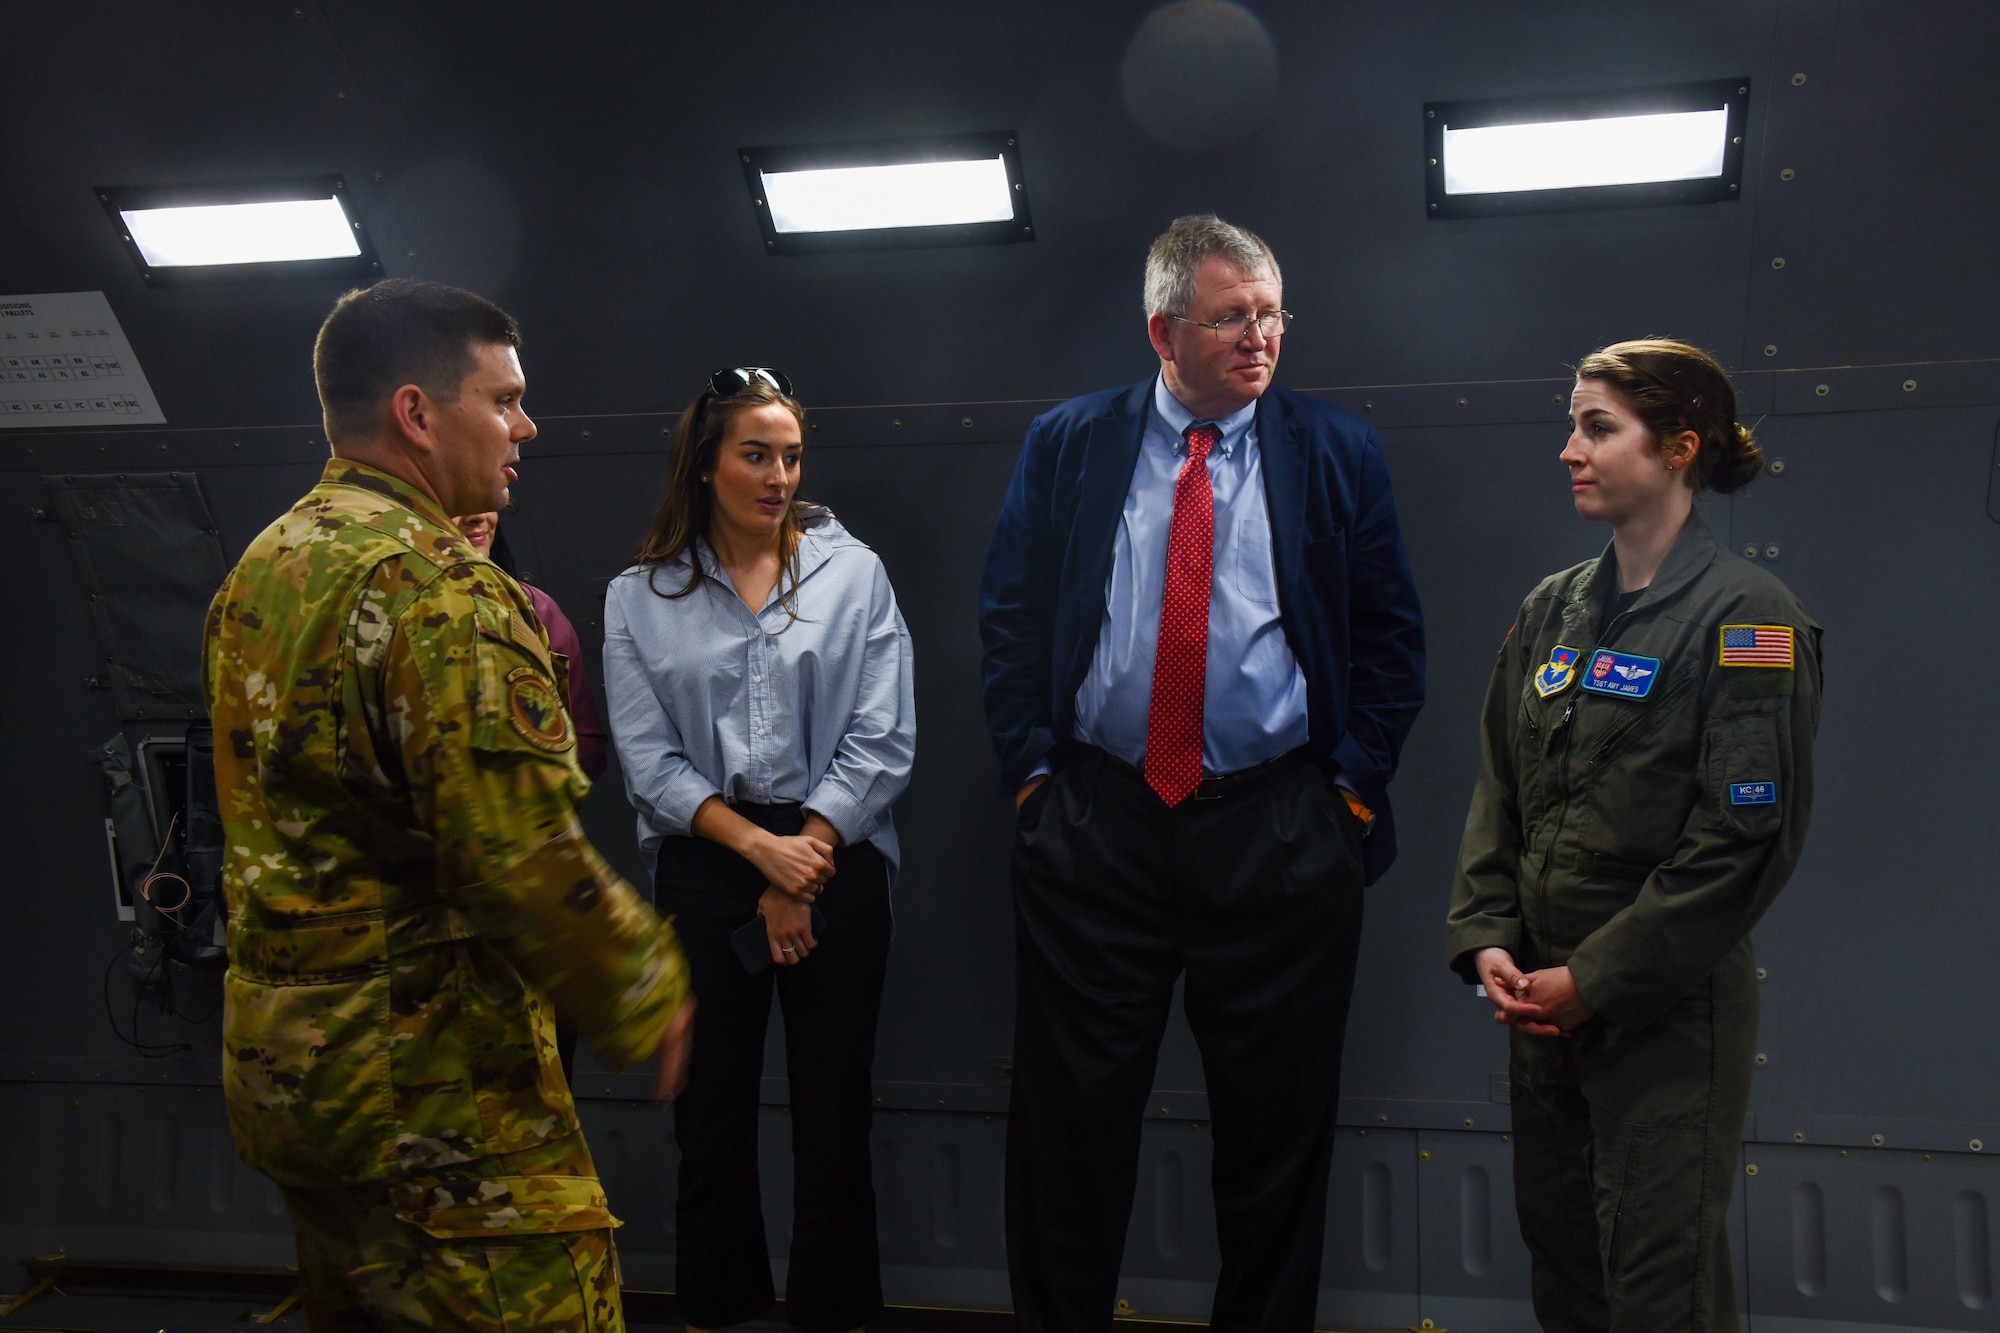 U.S. Air Force Lt. Col. Adam Boyd (left), 56th Air Refueling Squadron (ARS) commander, and Tech. Sgt. Amy James (right), 56th ARS chief of student management, gives a tour of a KC-46A Pegasus to Rep. Frank Lucas, Oklahoma congressman, and his team at Altus Air Force Base, Oklahoma, April 22, 2022. The KC-46A’s modernized cargo deck can accommodate a mixed load of passengers, patients and cargo and brings enhanced safety features to the mission. (U.S. Air Force photo by Airman 1st Class Miyah Gray)